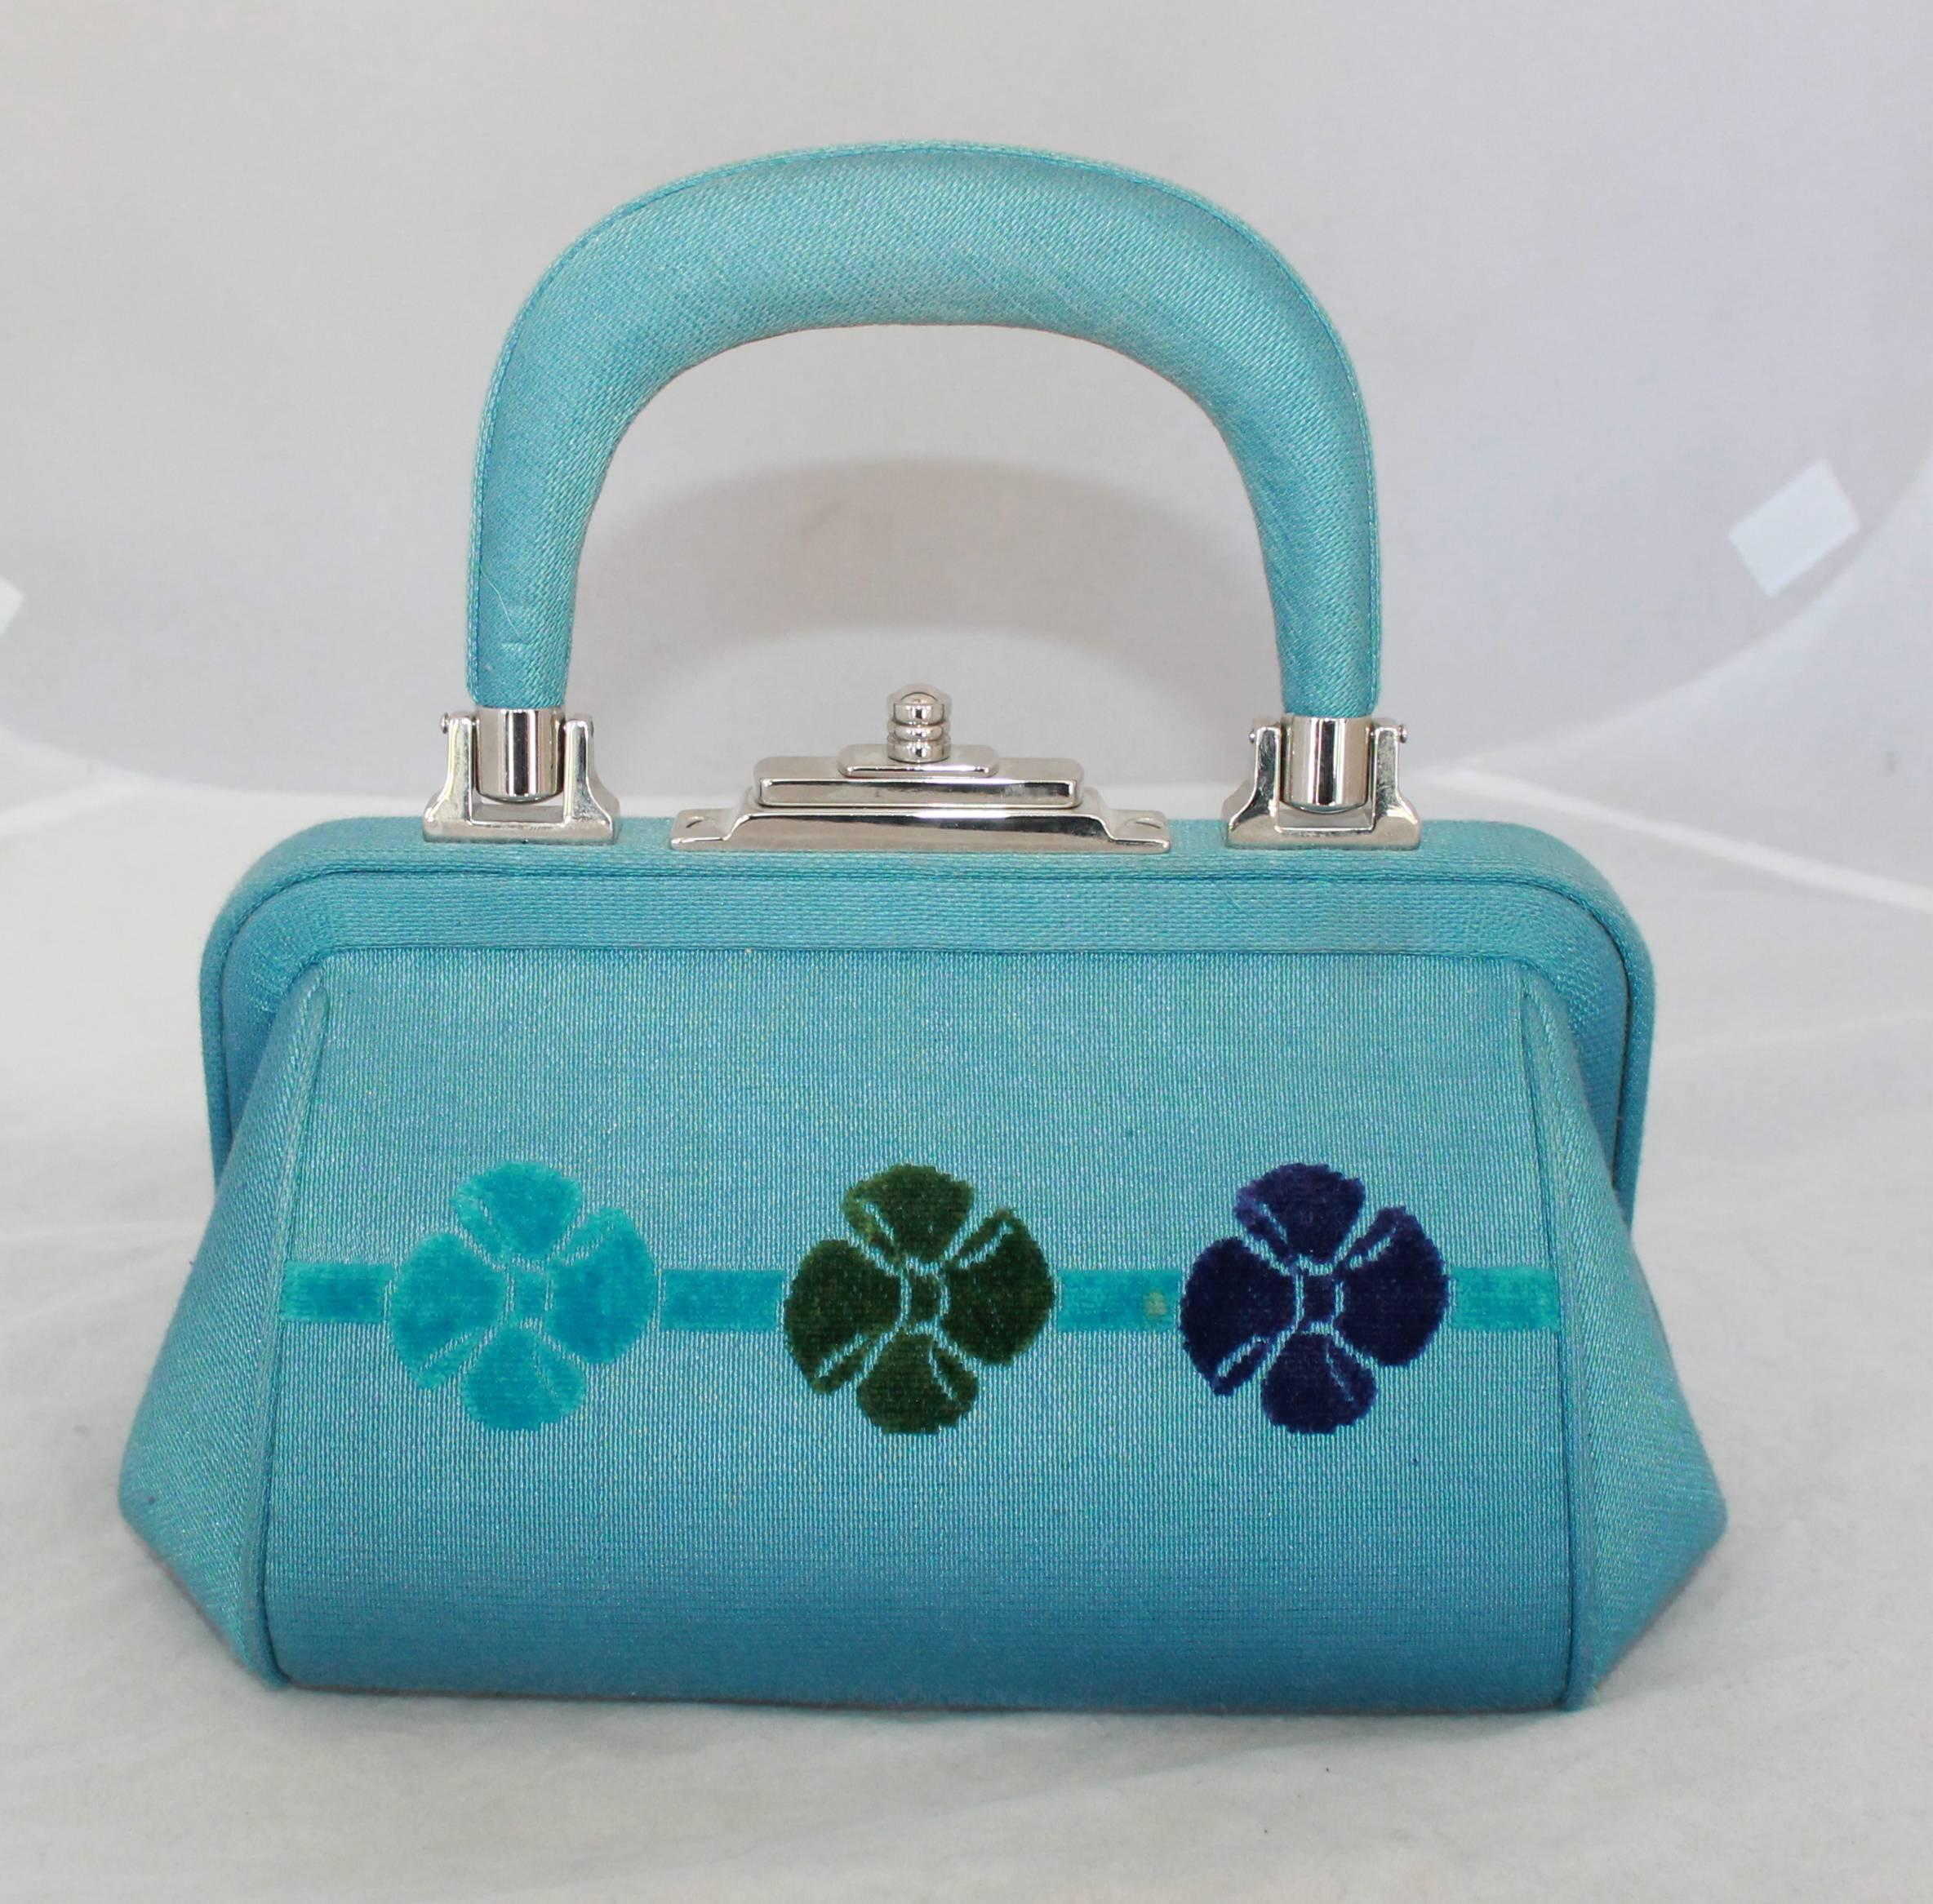 Roberta di Camerino Small Blue Fabric Bag with Flower Design

This bag is in good vintage condition with a small stain on the front left and back right of bag, it also has some wear on handle. It has silver hardware and a top handle with a cut out